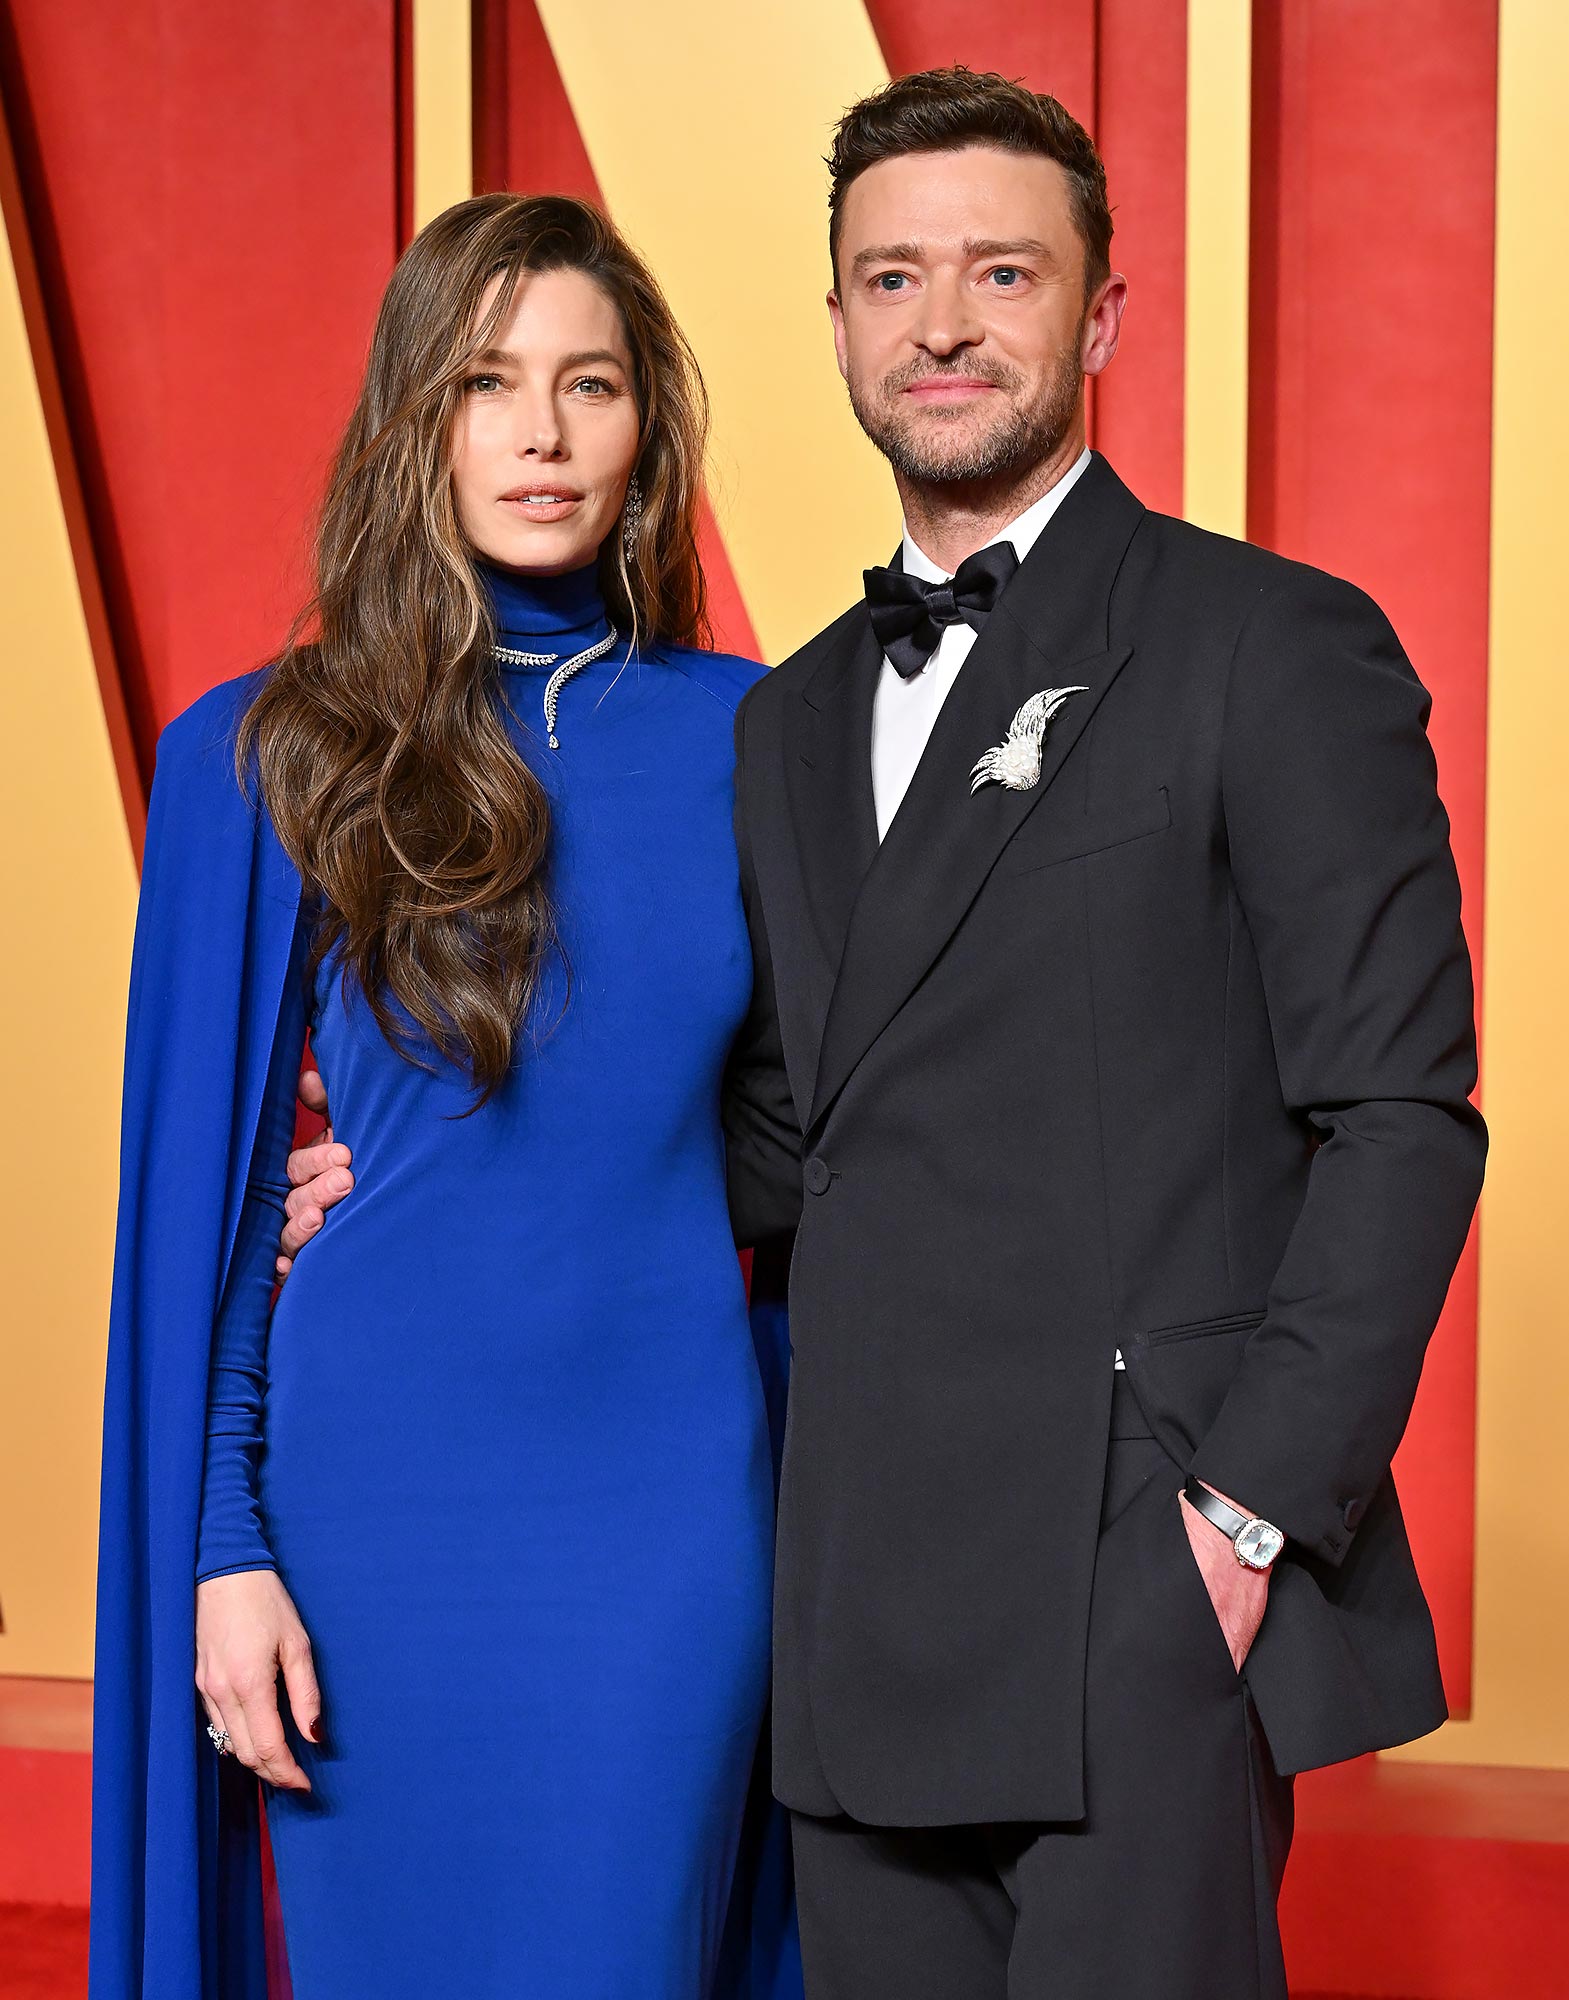 Jessica Biel Was Filming Upcoming Show in NYC Hours Before Husband Justin Timberlake’s Arrest